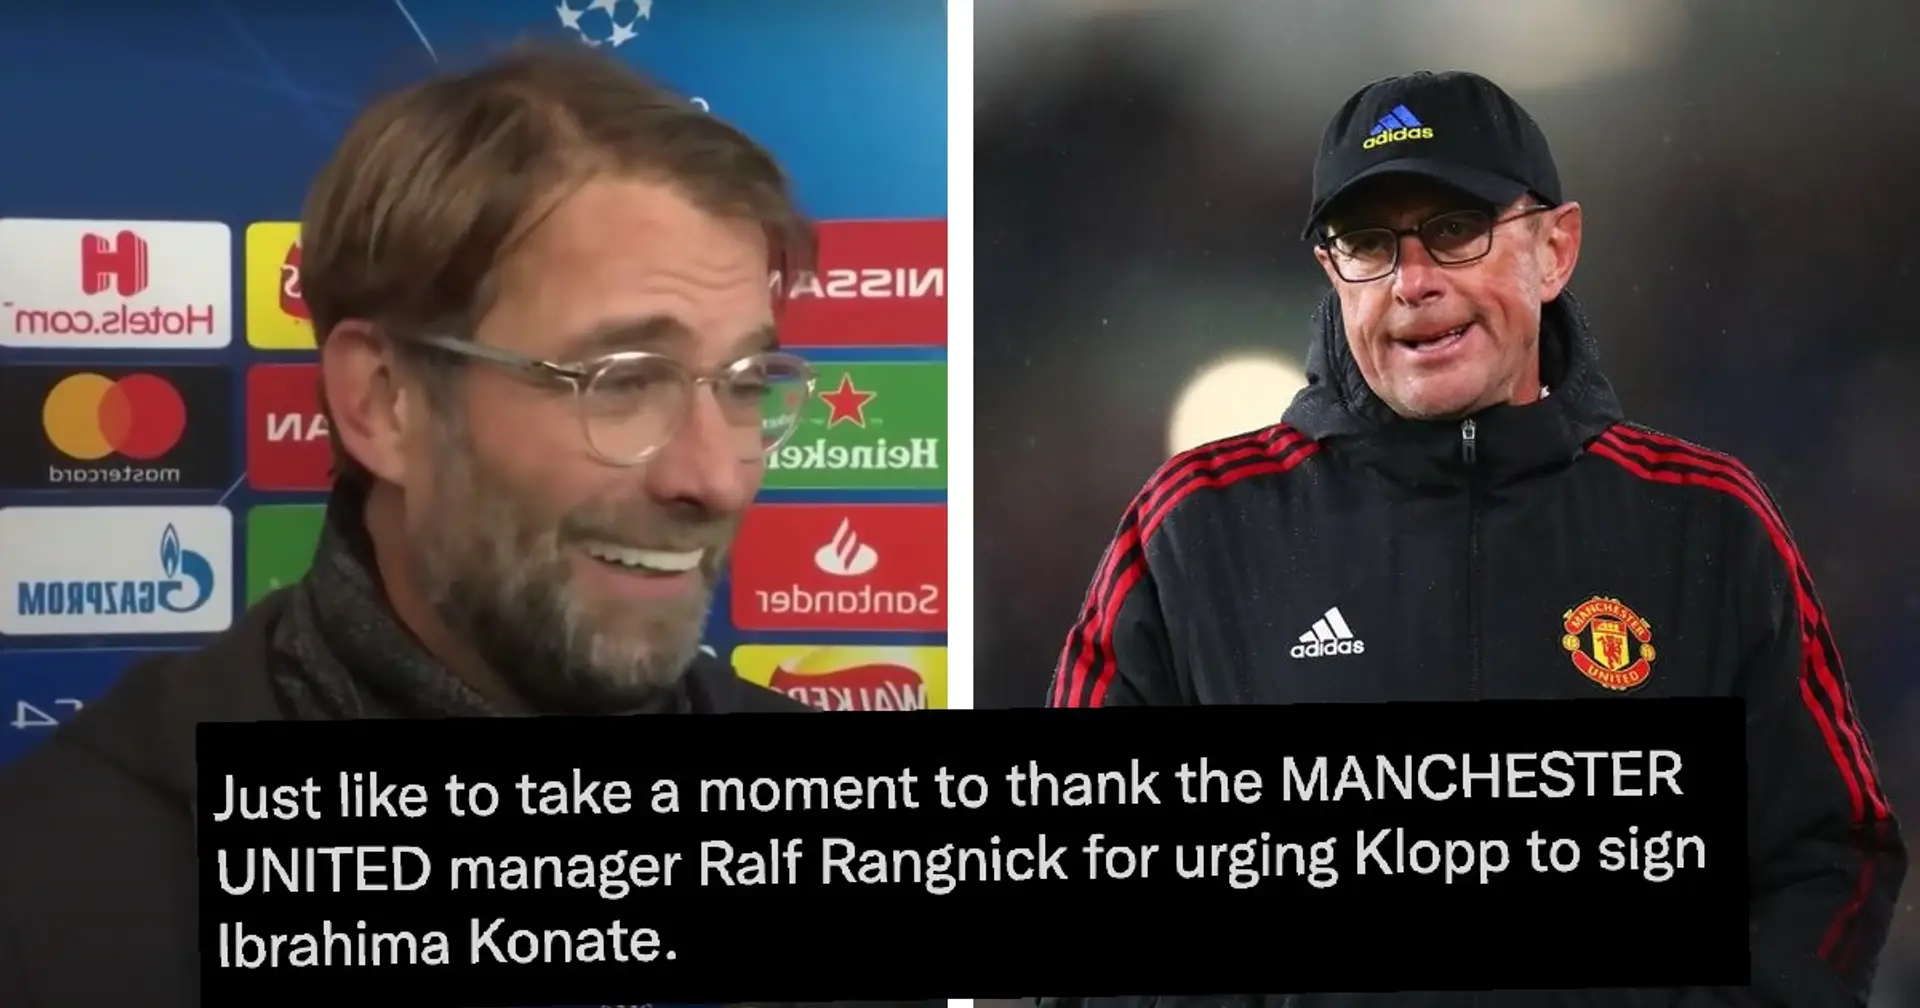 'Take a moment to thank United manager': Liverpool fan grateful to Ralf Rangnick for our signing